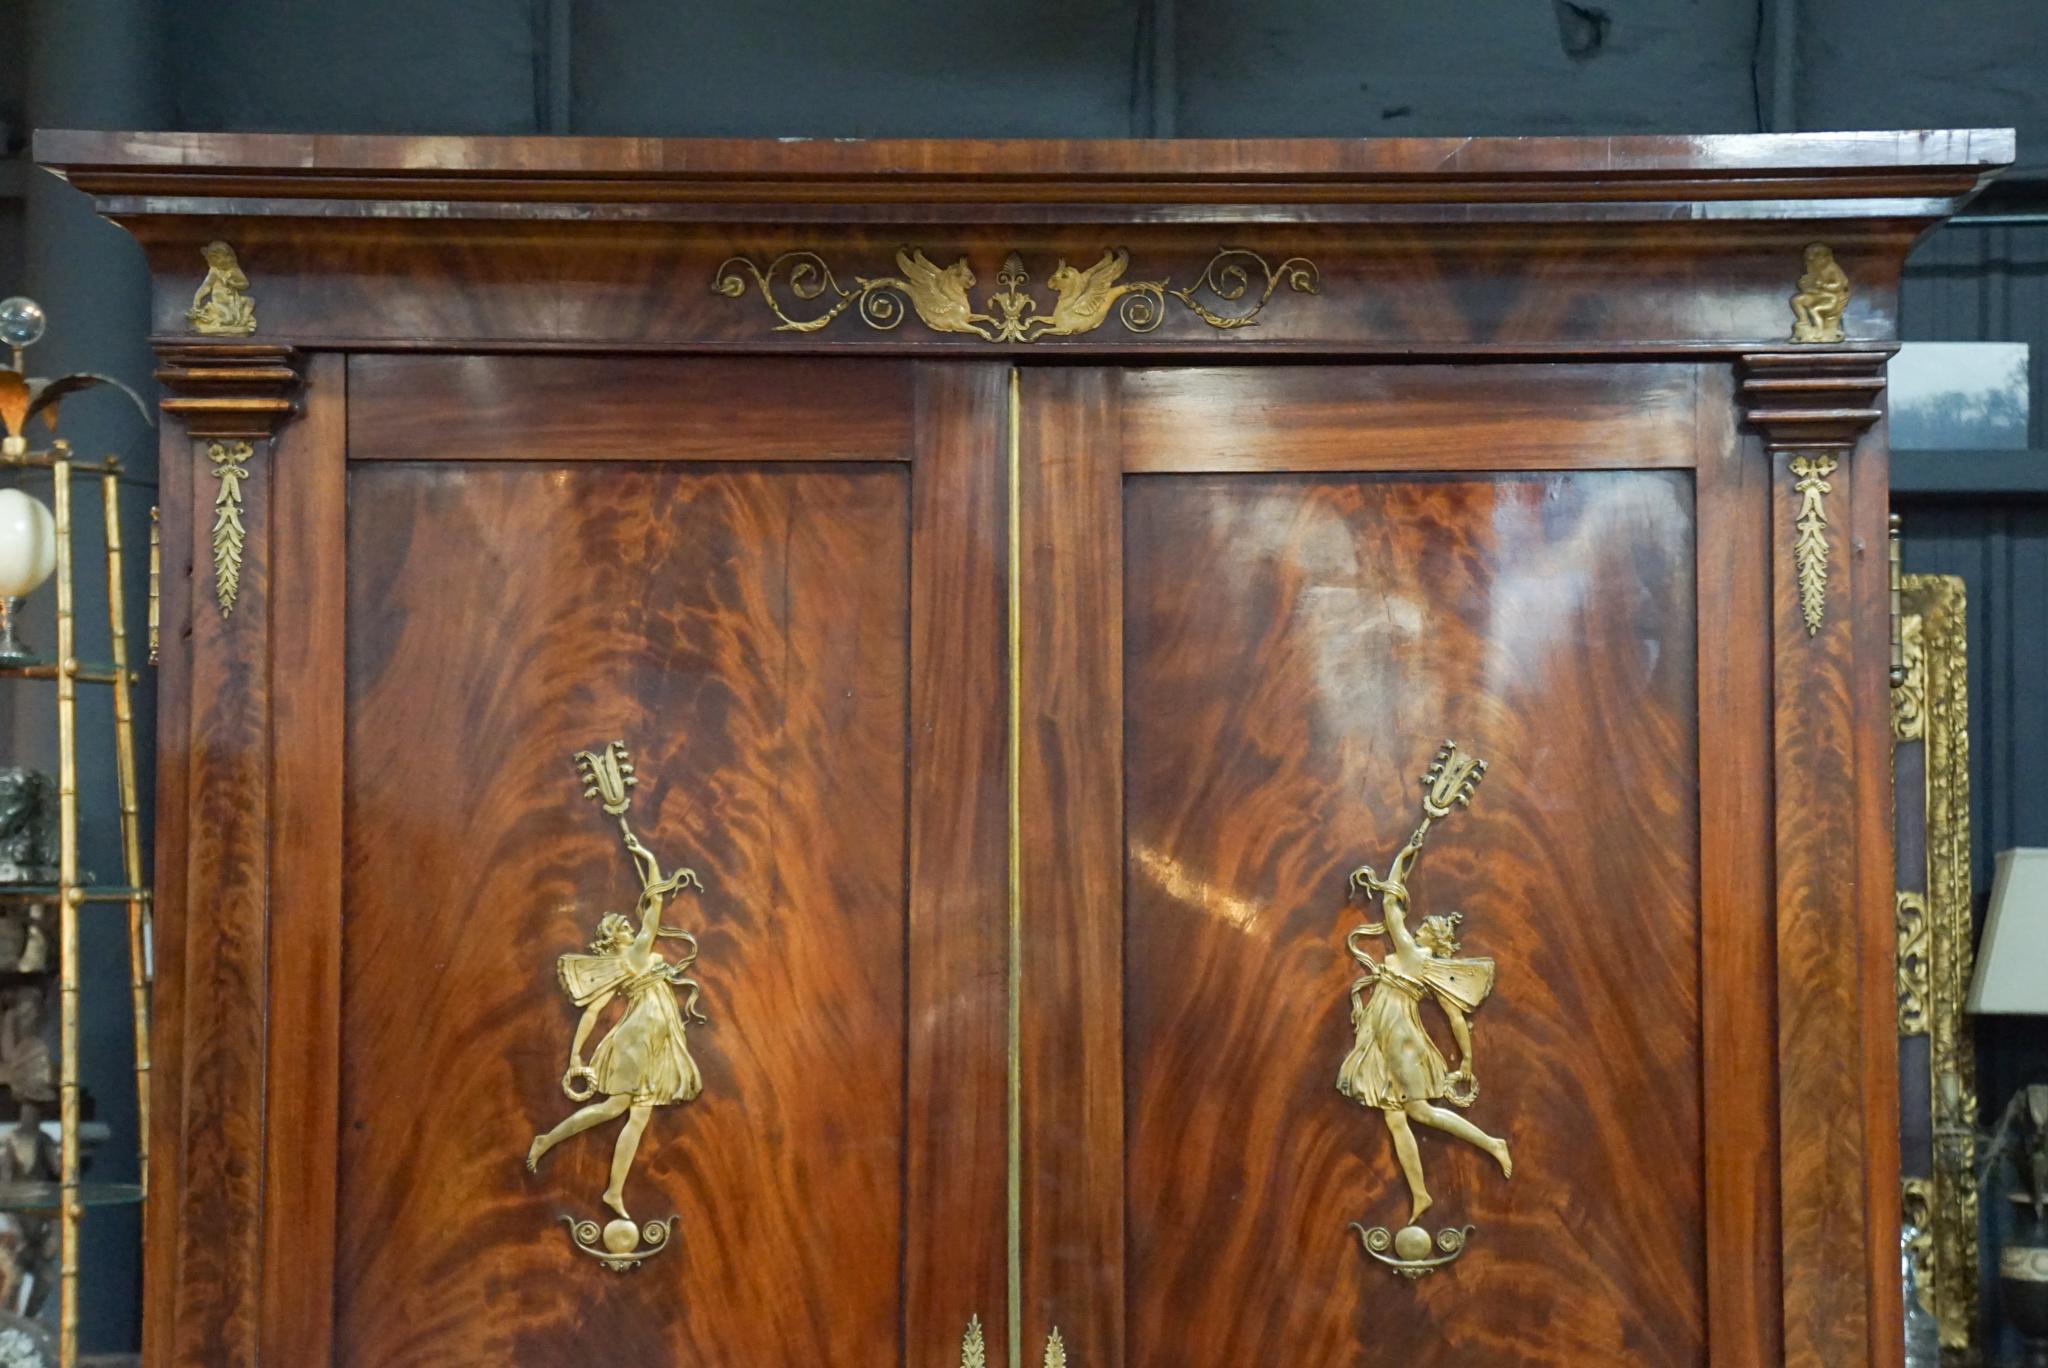 This impressive and commanding wardrobe made in France at the end of the 19th century is almost certainly by Masion Krieger; While not stamped certain details are directly relatable to other stamped works by the firm. We have found two other large